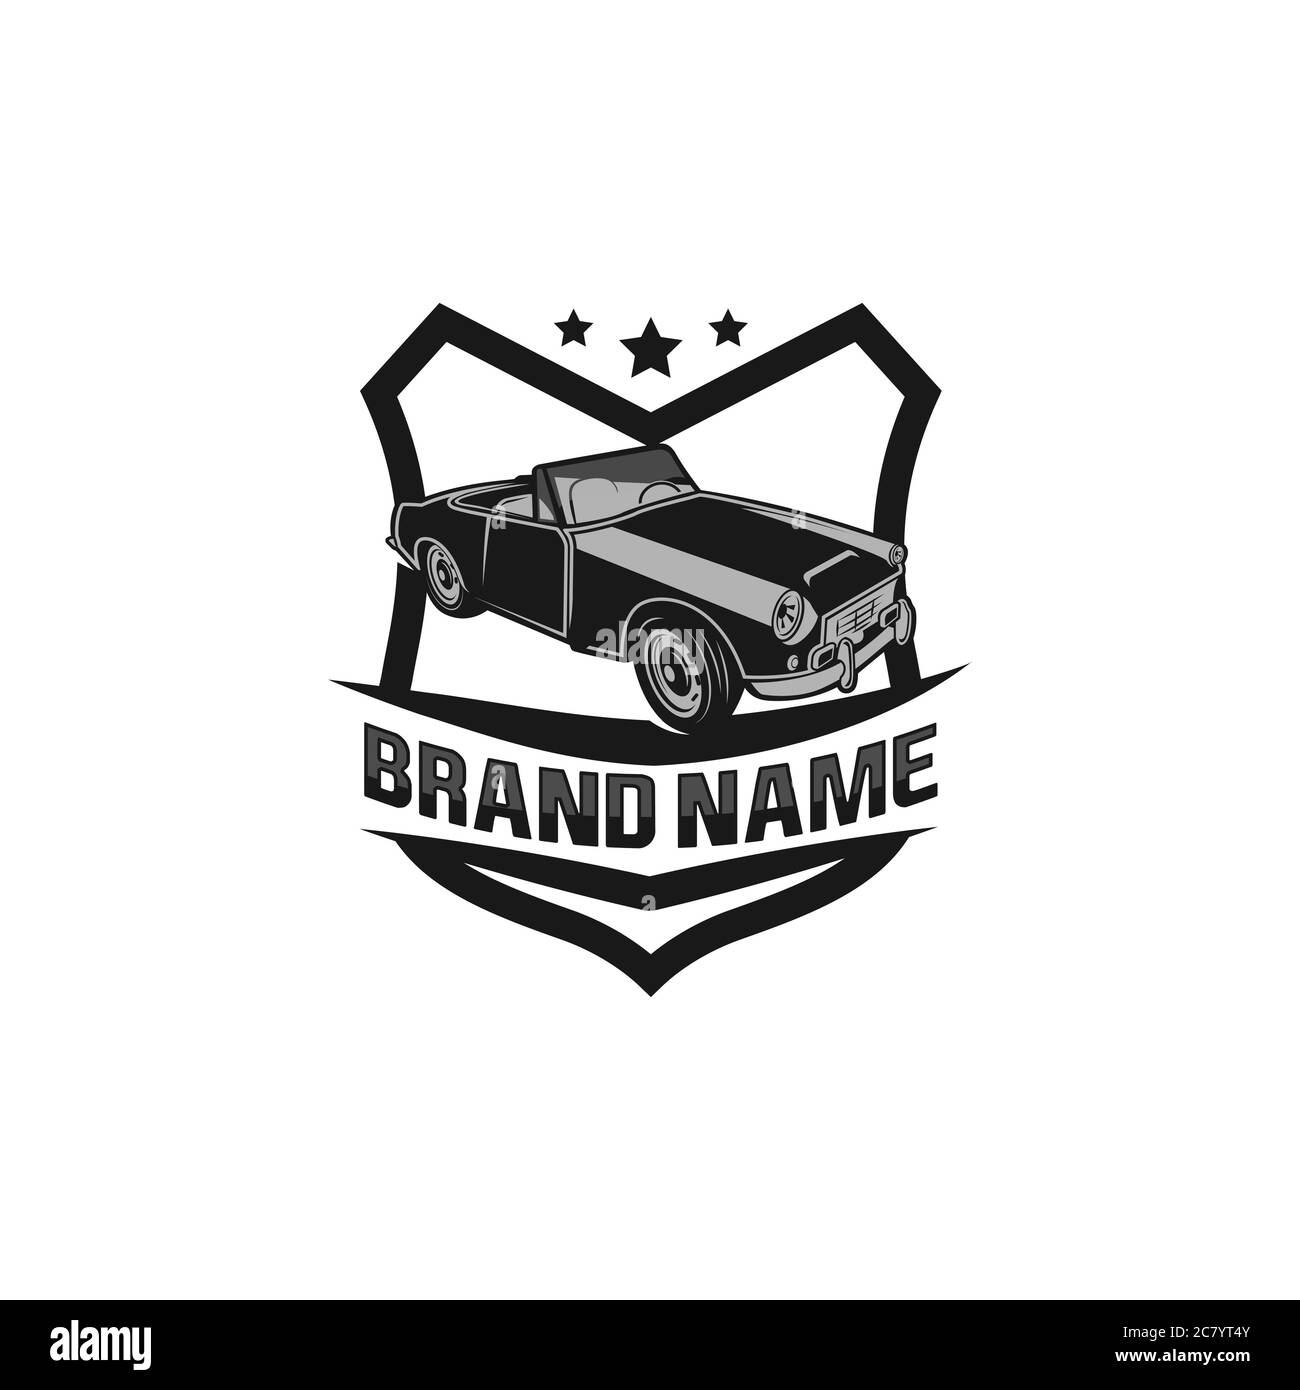 A template of classic or vintage or retro car logo design. vintage style.EPS 10 Stock Vector